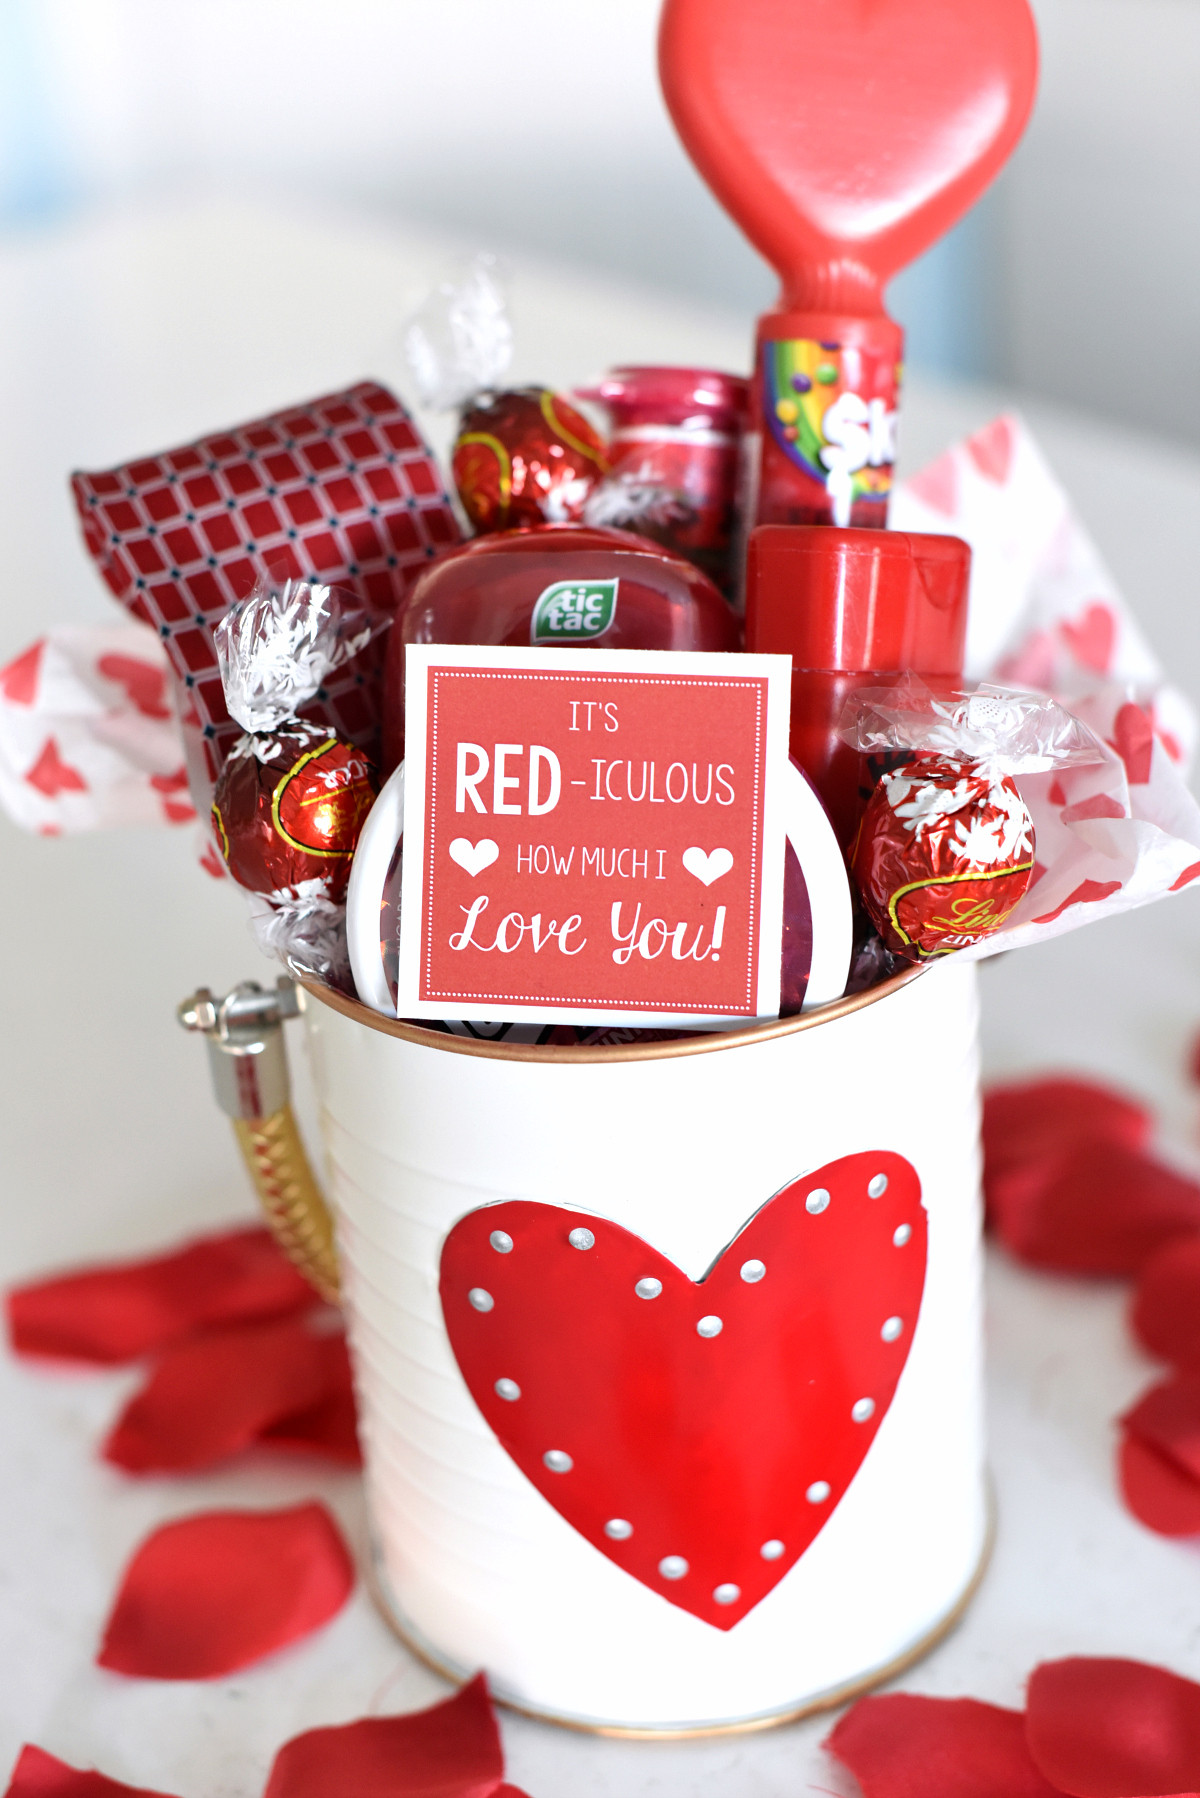 Valentine Sweet Gift Ideas
 Cute Valentine s Day Gift Idea RED iculous Basket